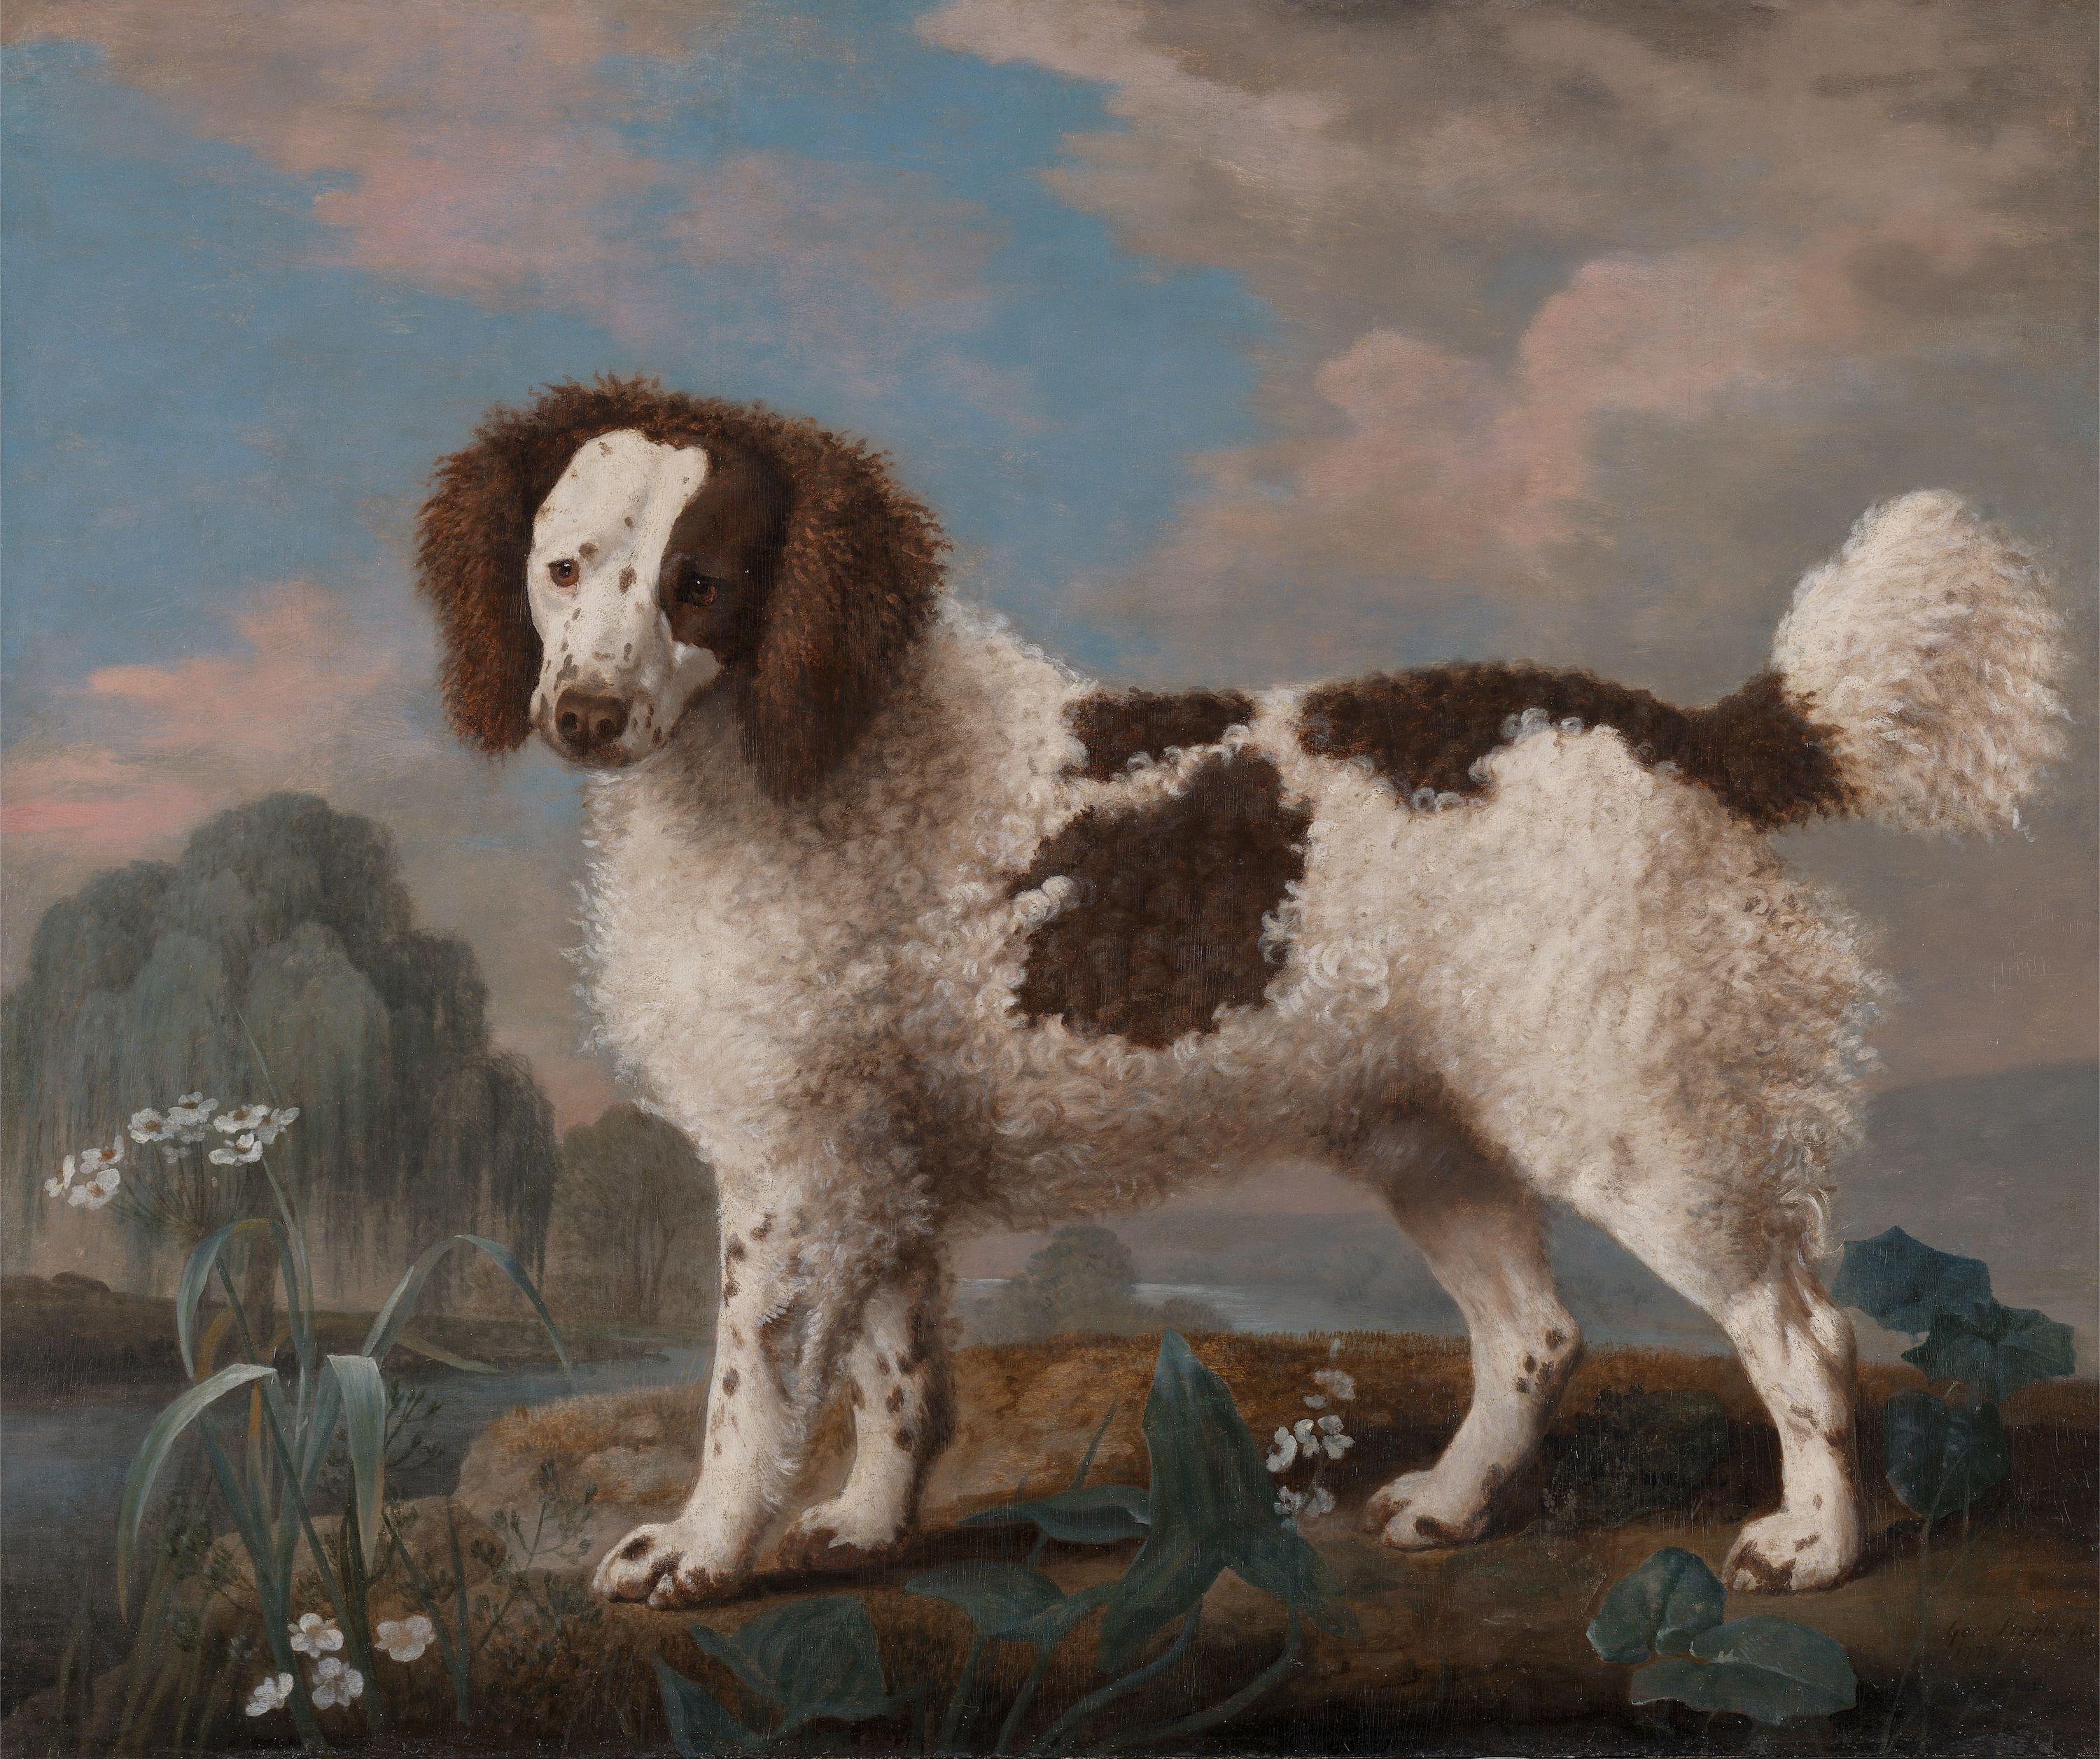 Brown and White Norfolk or Water Spaniel by George Stubbs - 1778 - 80.6 x 97.2 cm Yale Center for British Art